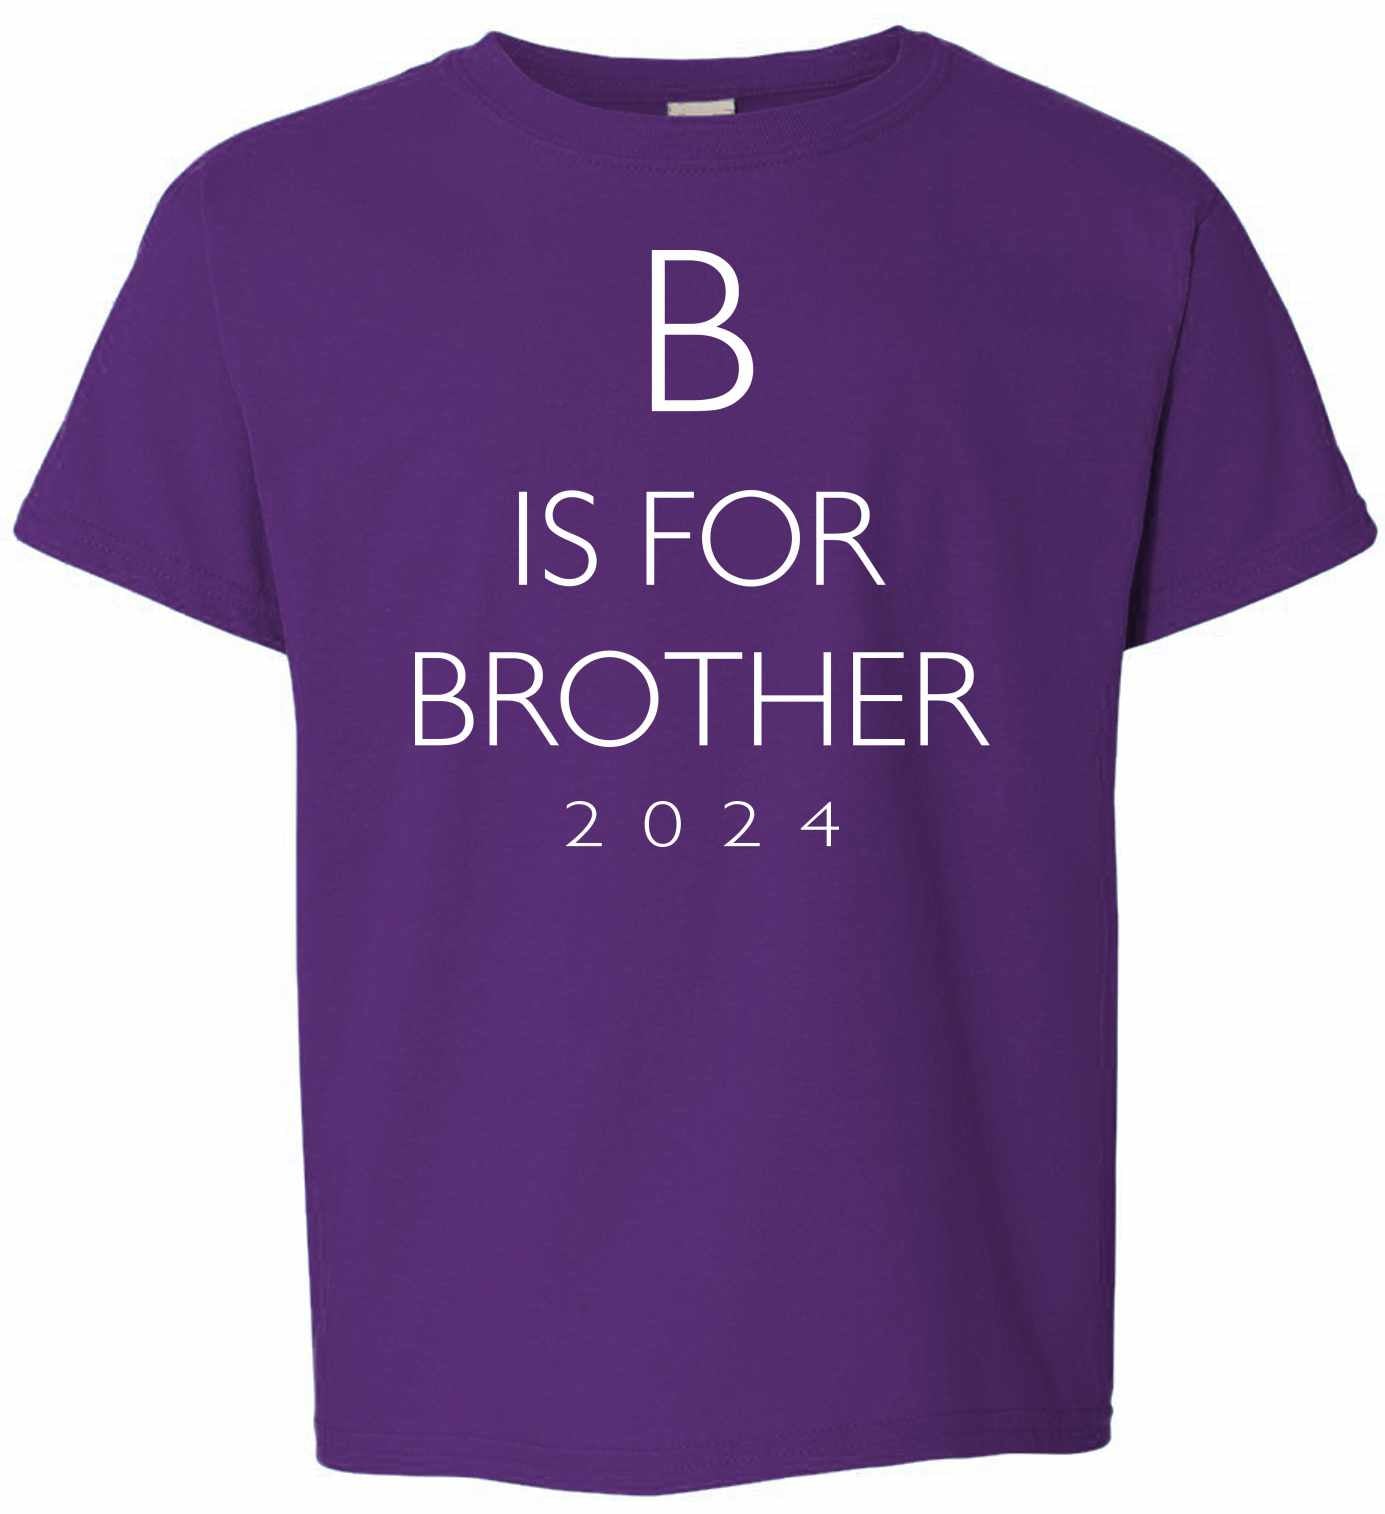 B Is For Brother 2024 on Kids T-Shirt